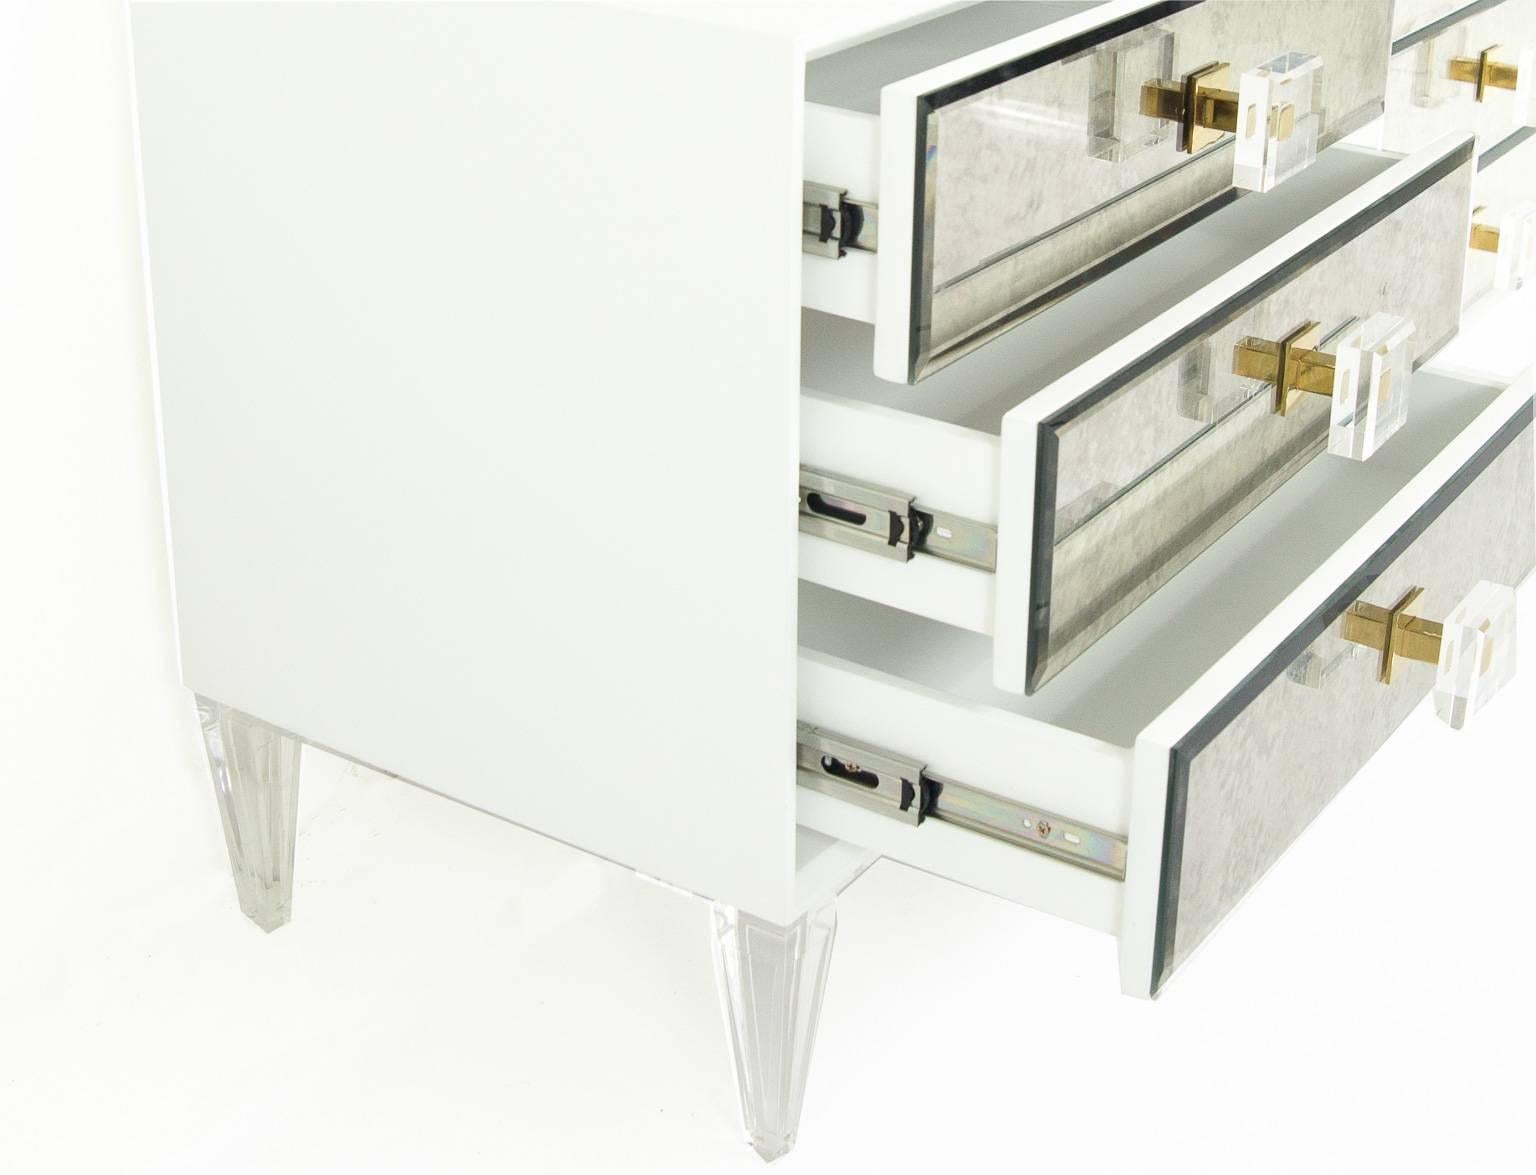 In a matte white box and gorgeous antique mirrors is ModShop's Juliette side table. Side table comes with three drawers that feature our Lucite and brass square pulls. This table is perfect to add a vintage look to any room.

This is a made to